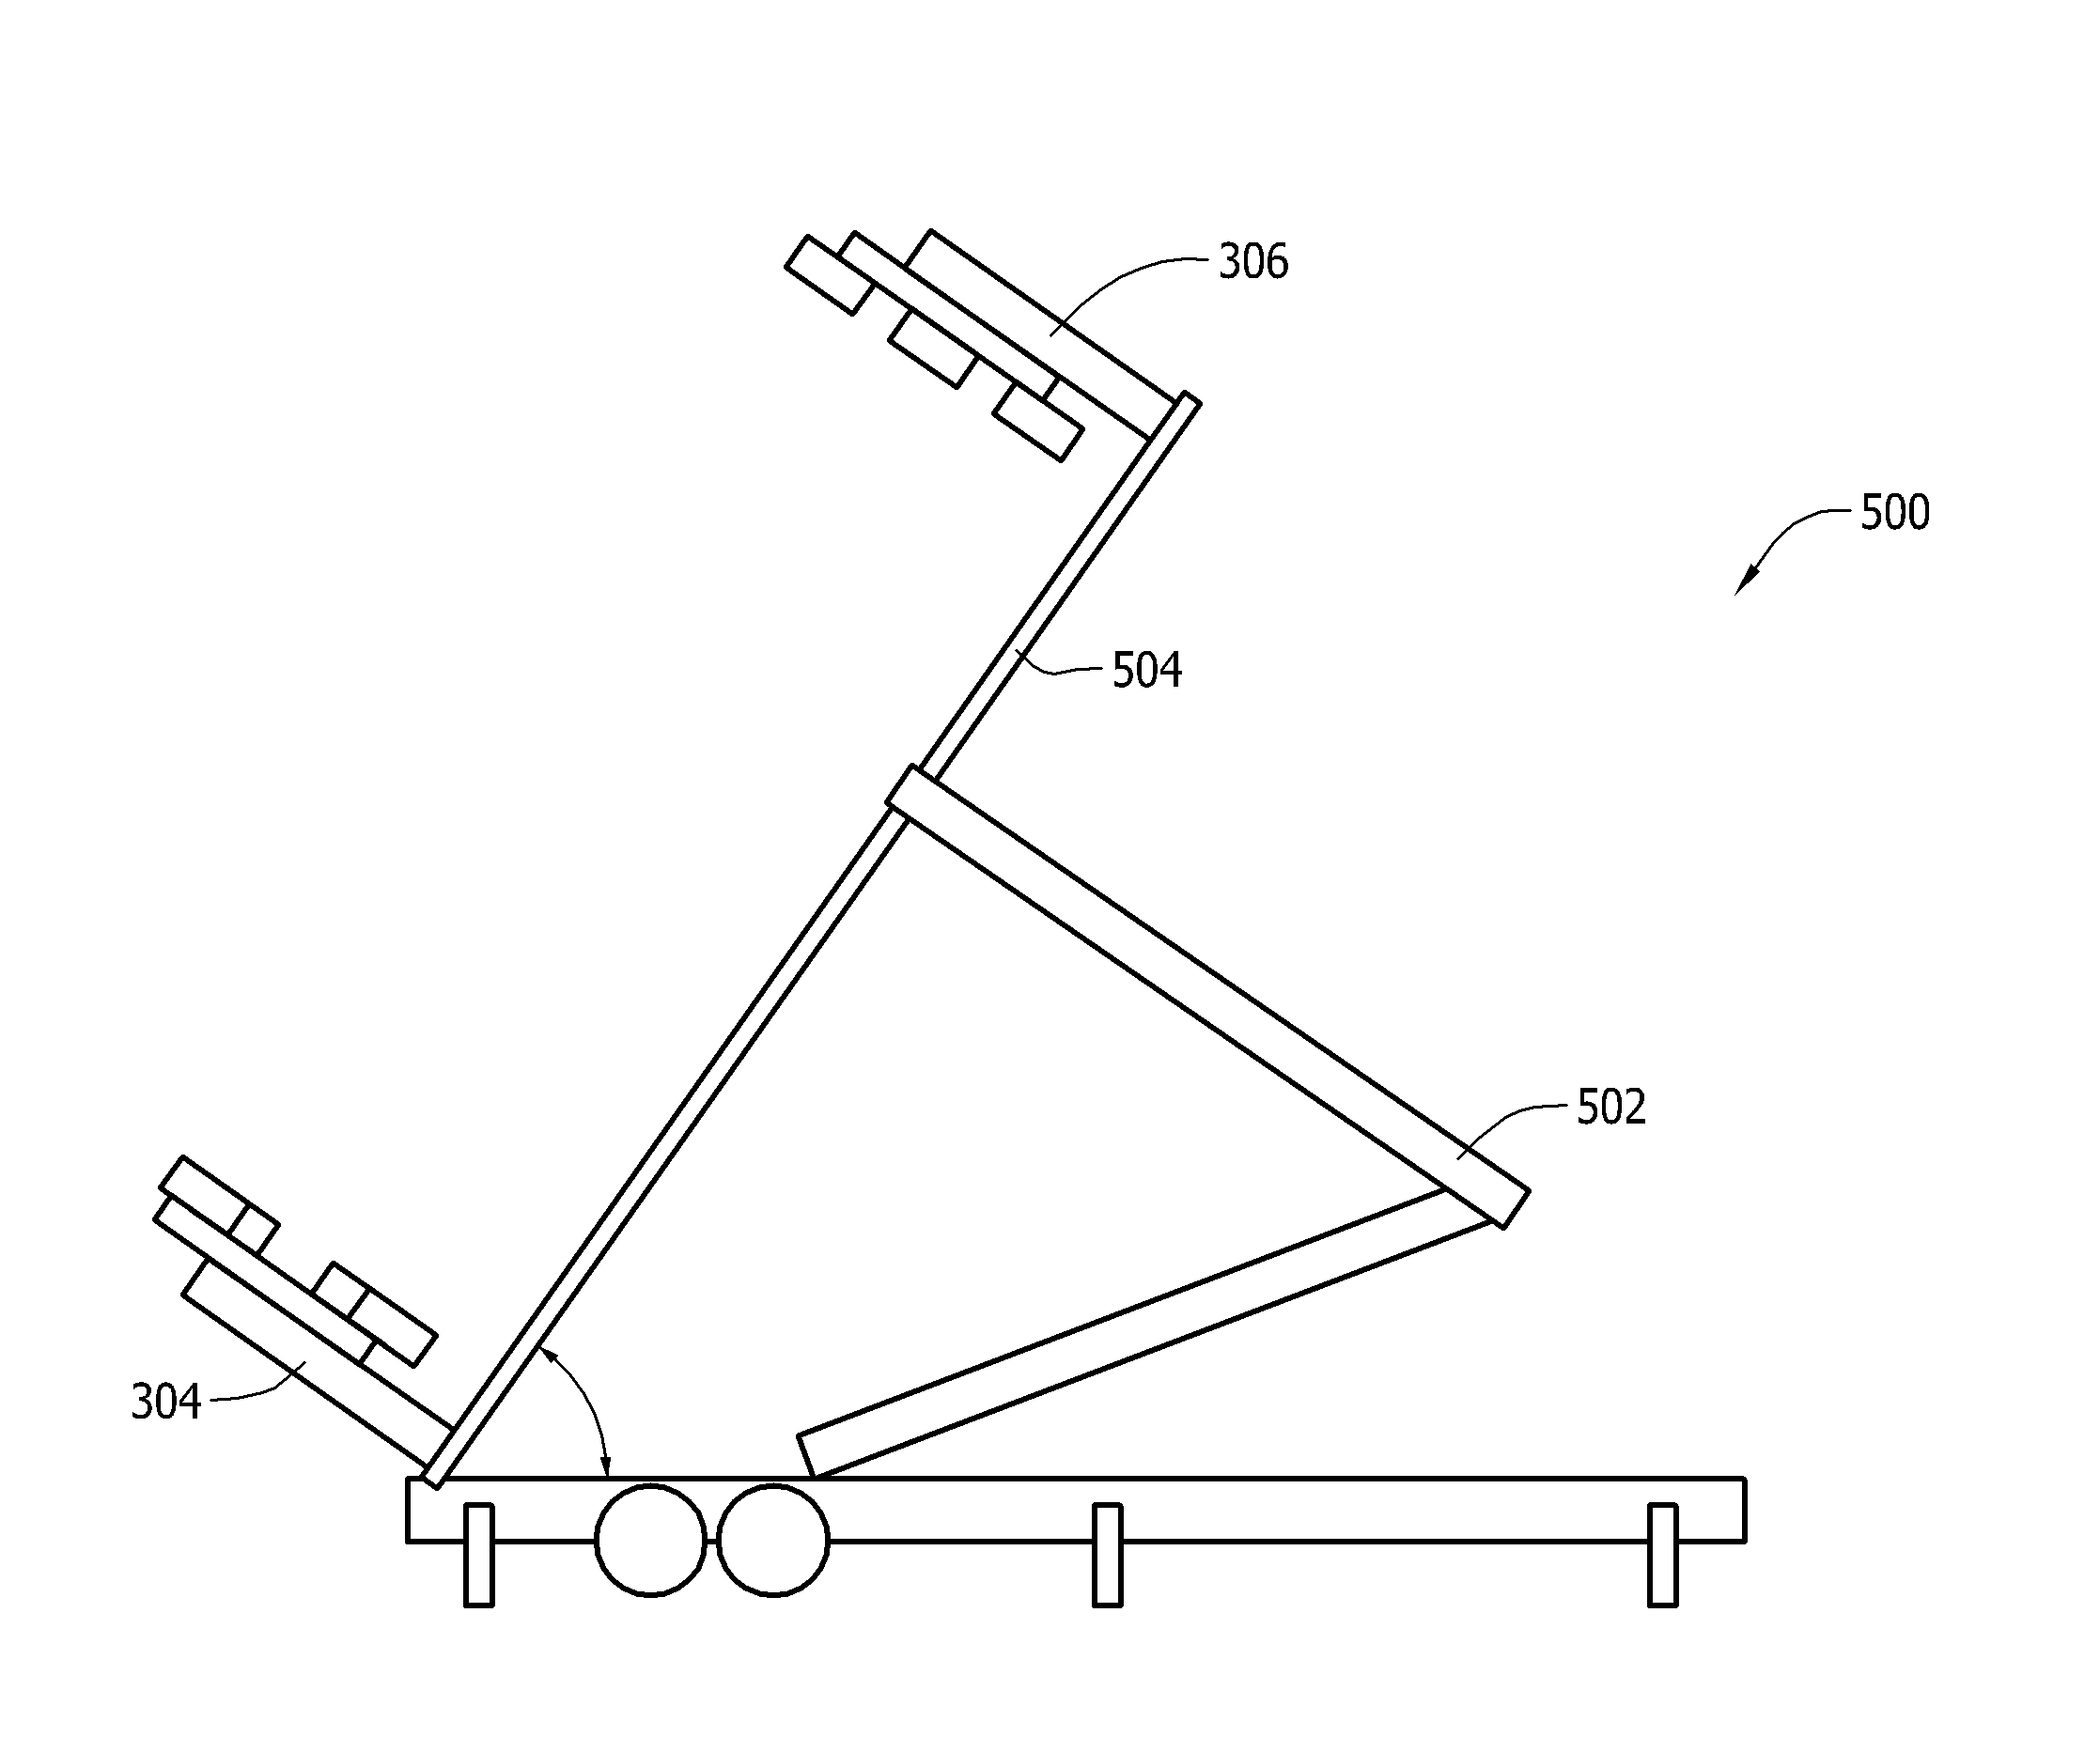 Systems and method of assembling a tower section